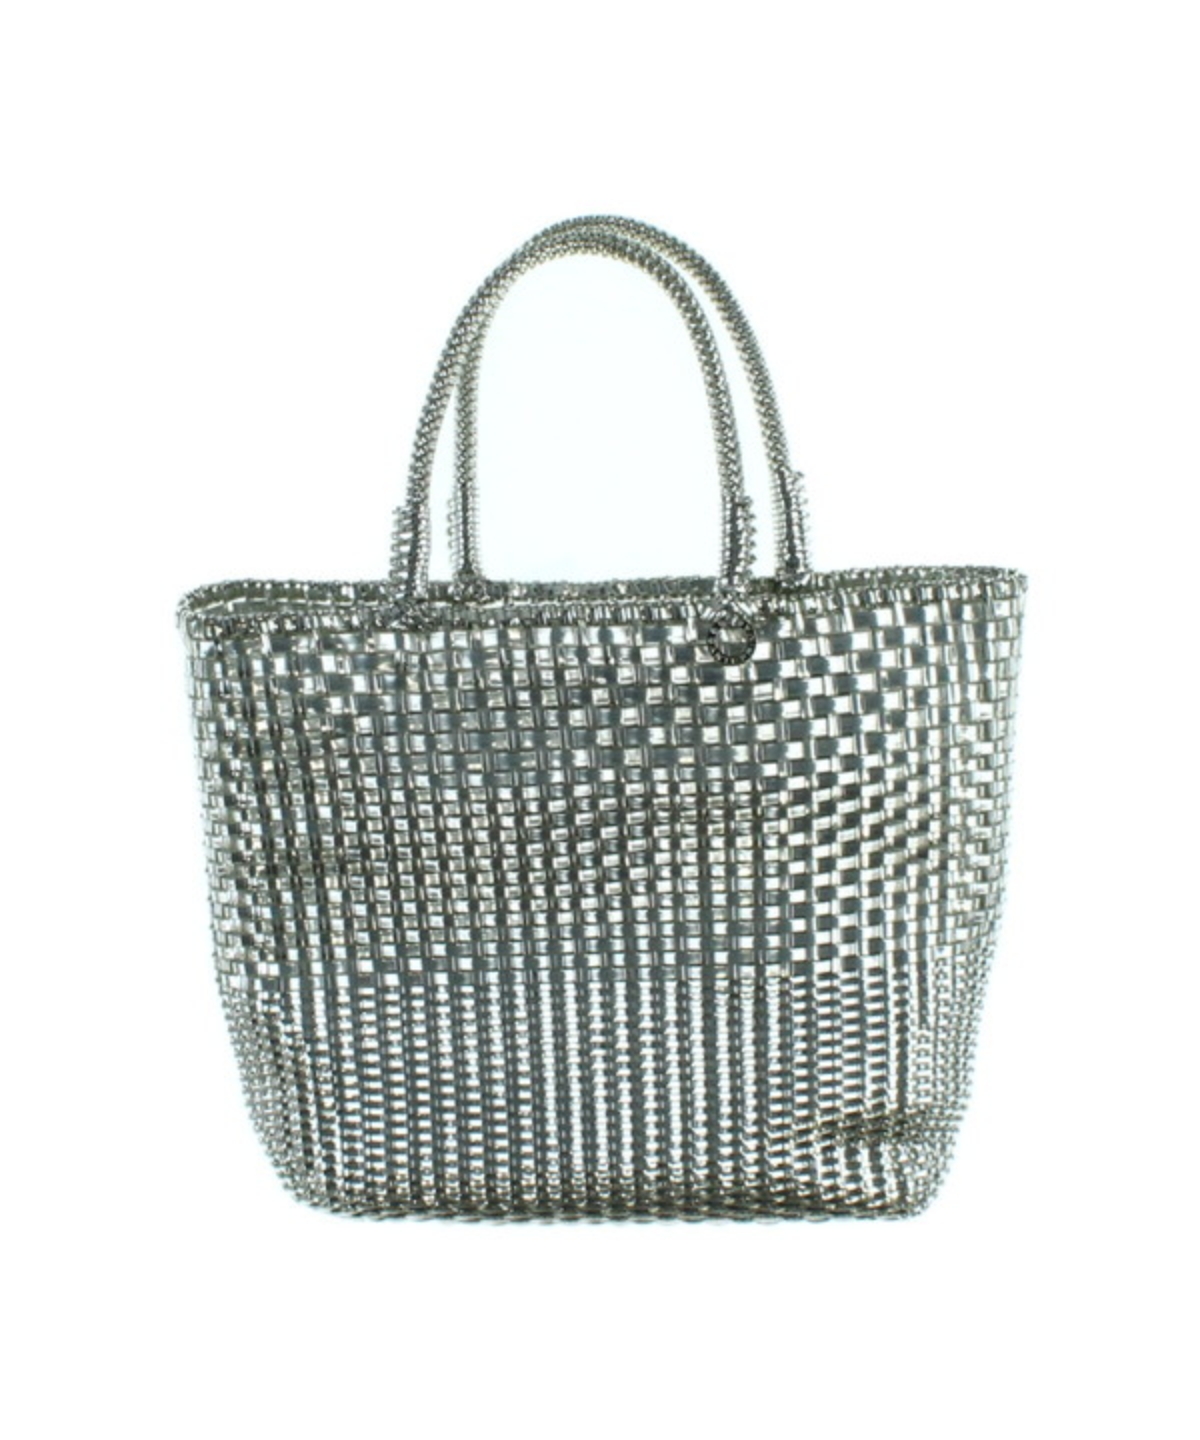 ANTEPRIMA Totes Silver Size: -Women's | RAGTAG - Online Thrift Store